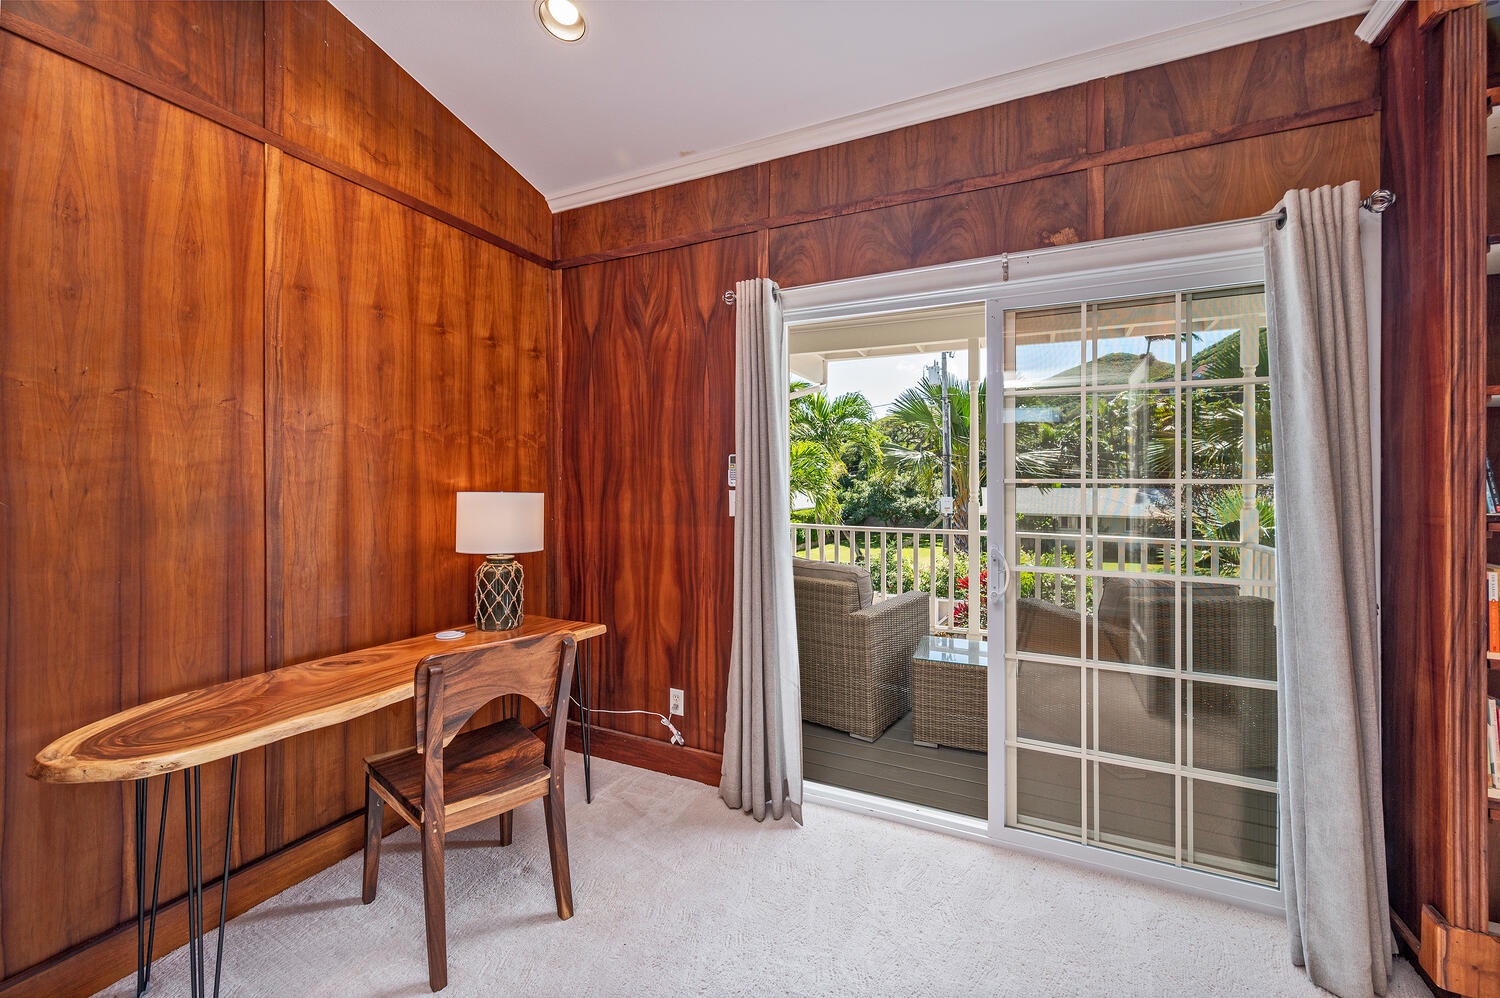 Kailua Vacation Rentals, Villa Hui Hou - Library/Study with shared covered lanai with the Primary